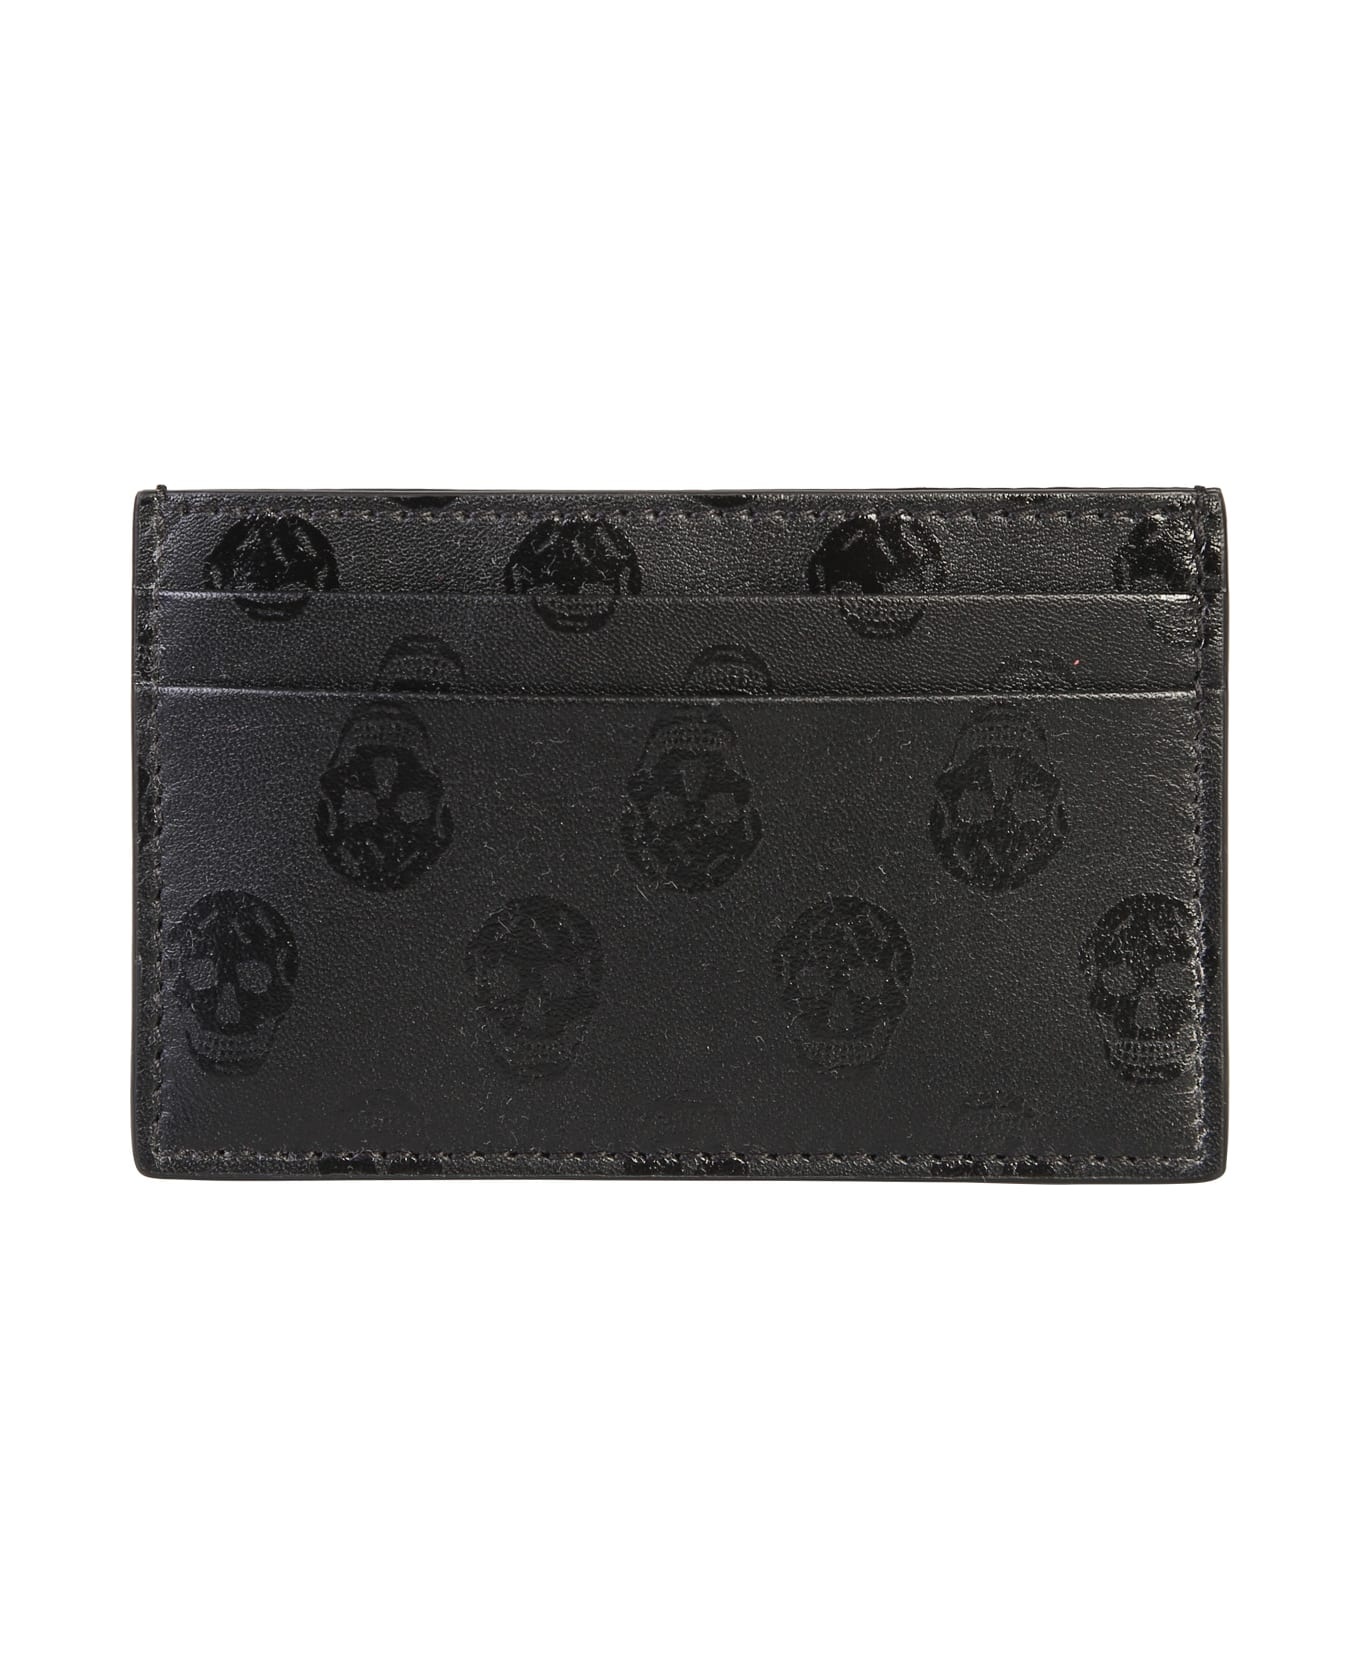 Leather Card Holder With Iconic Biker Skull Print - 1